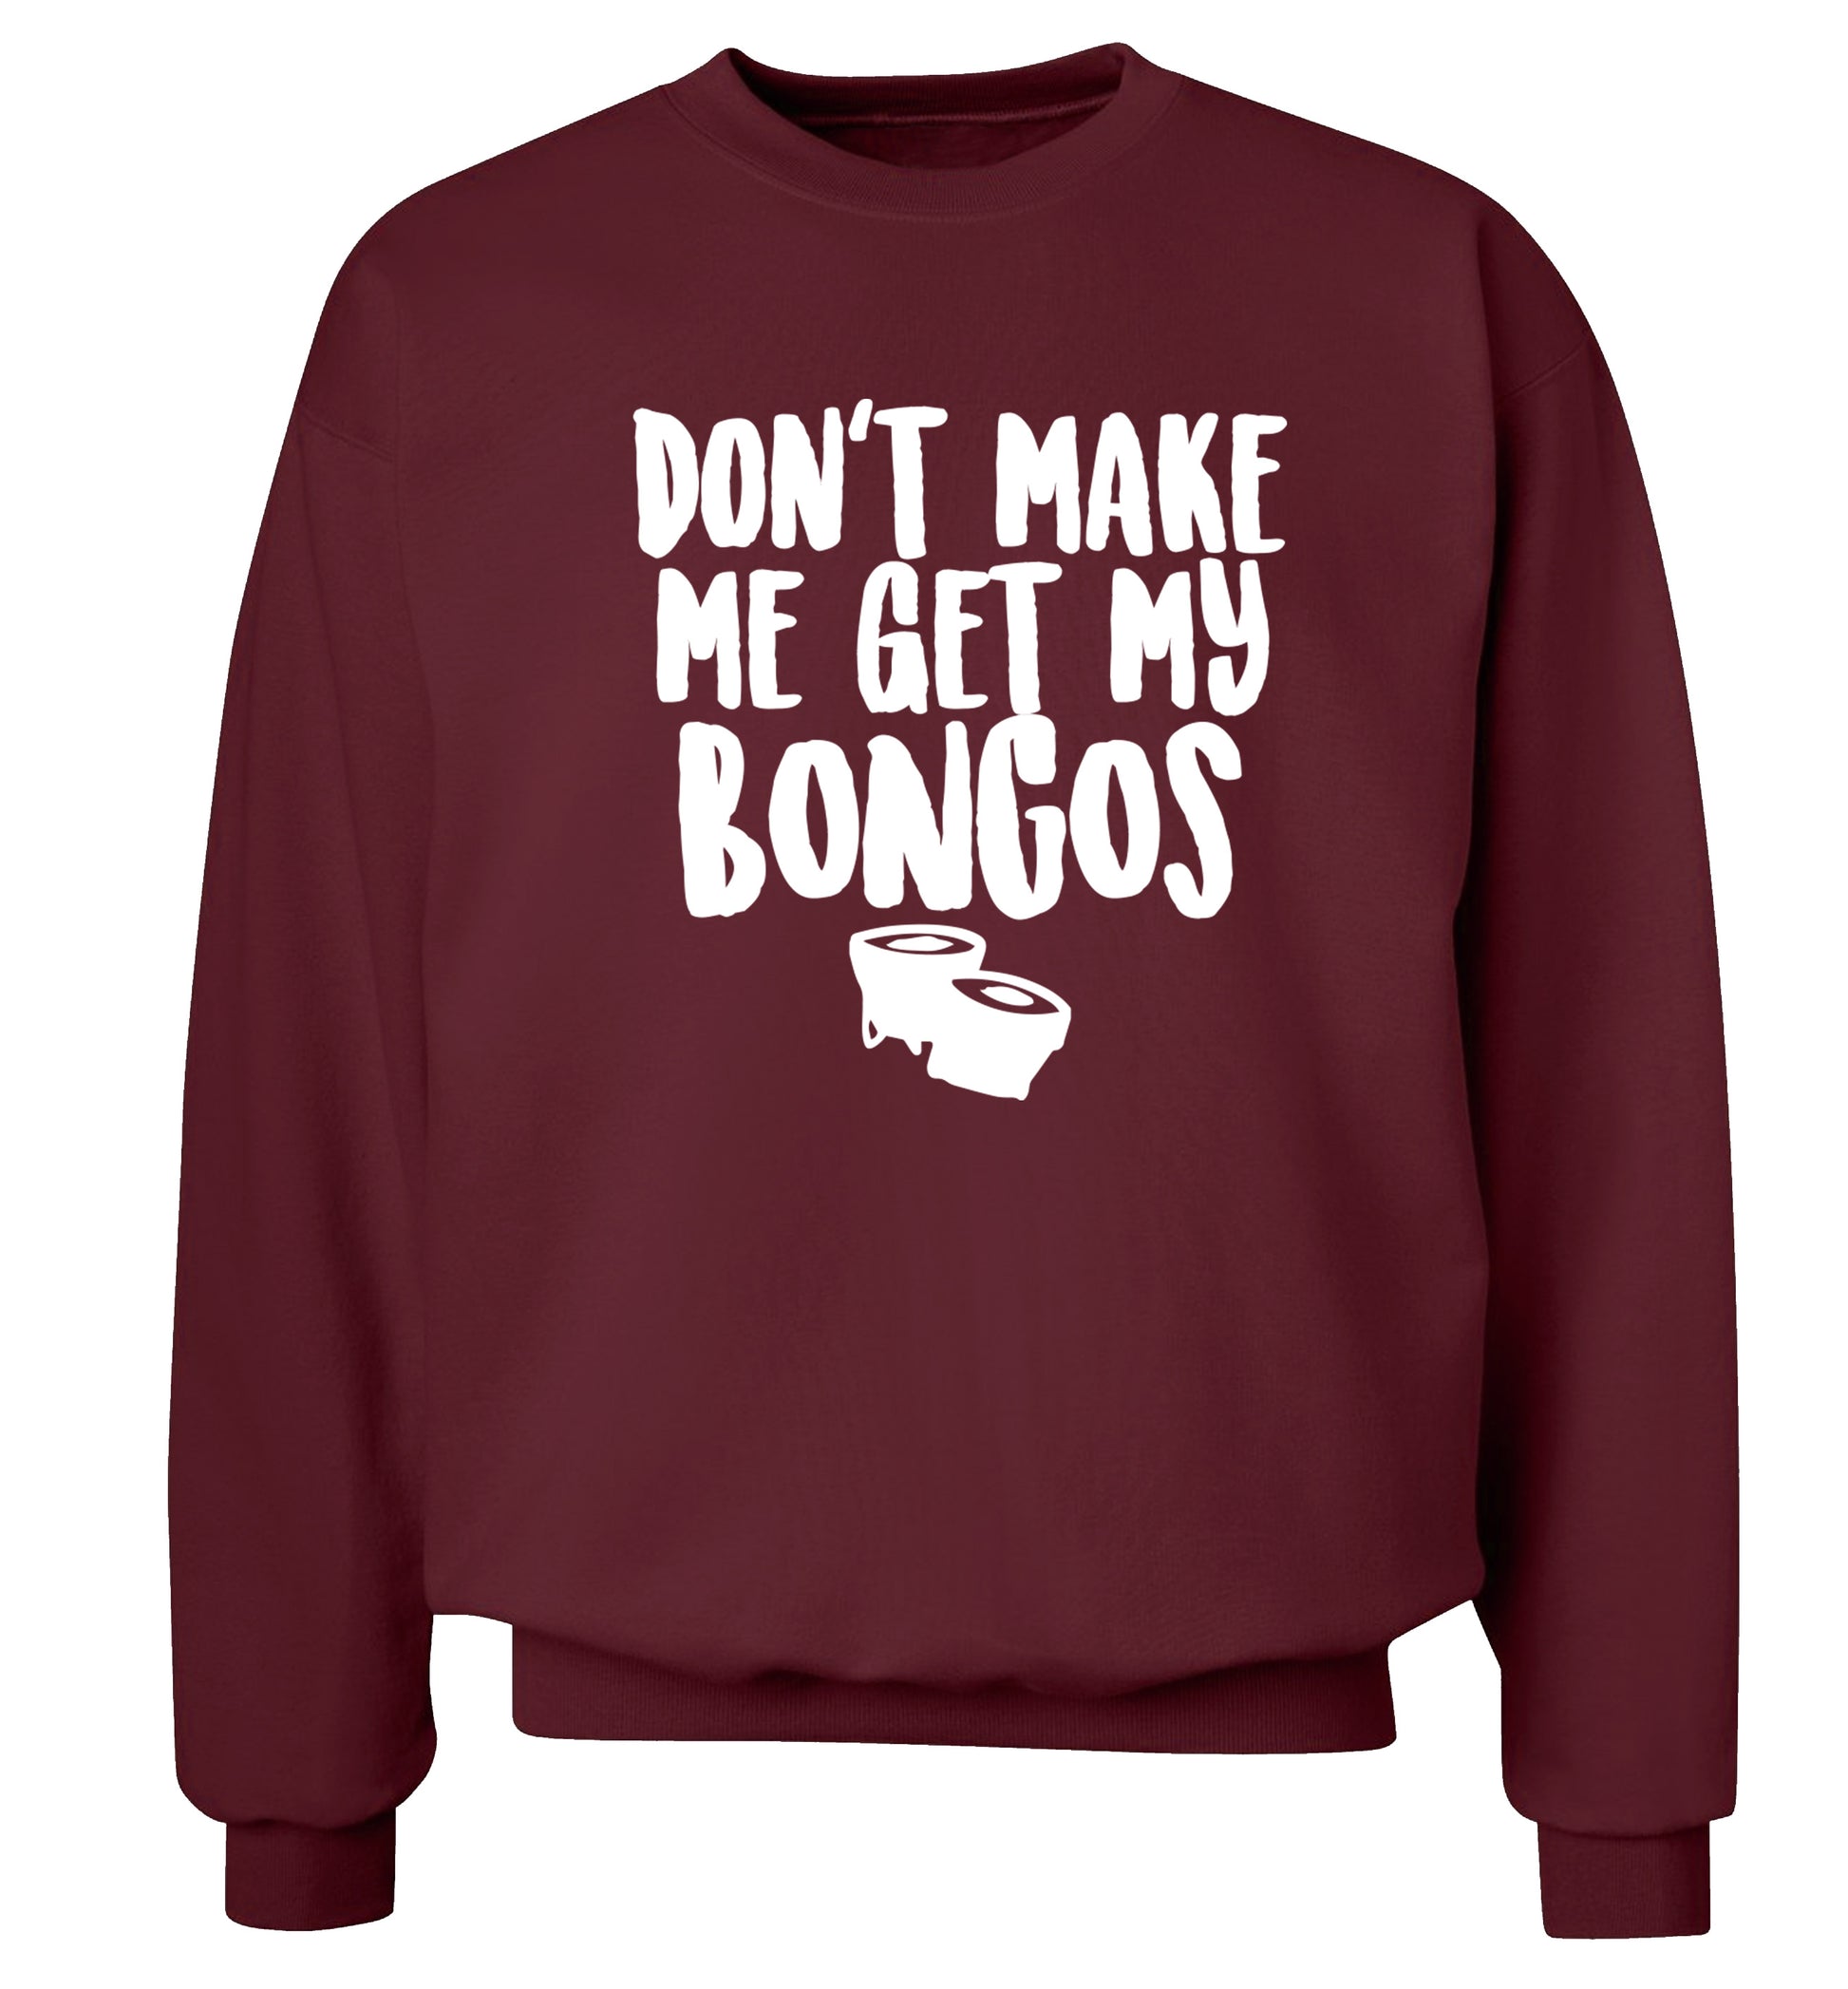 Don't make me get my bongos Adult's unisex maroon Sweater 2XL